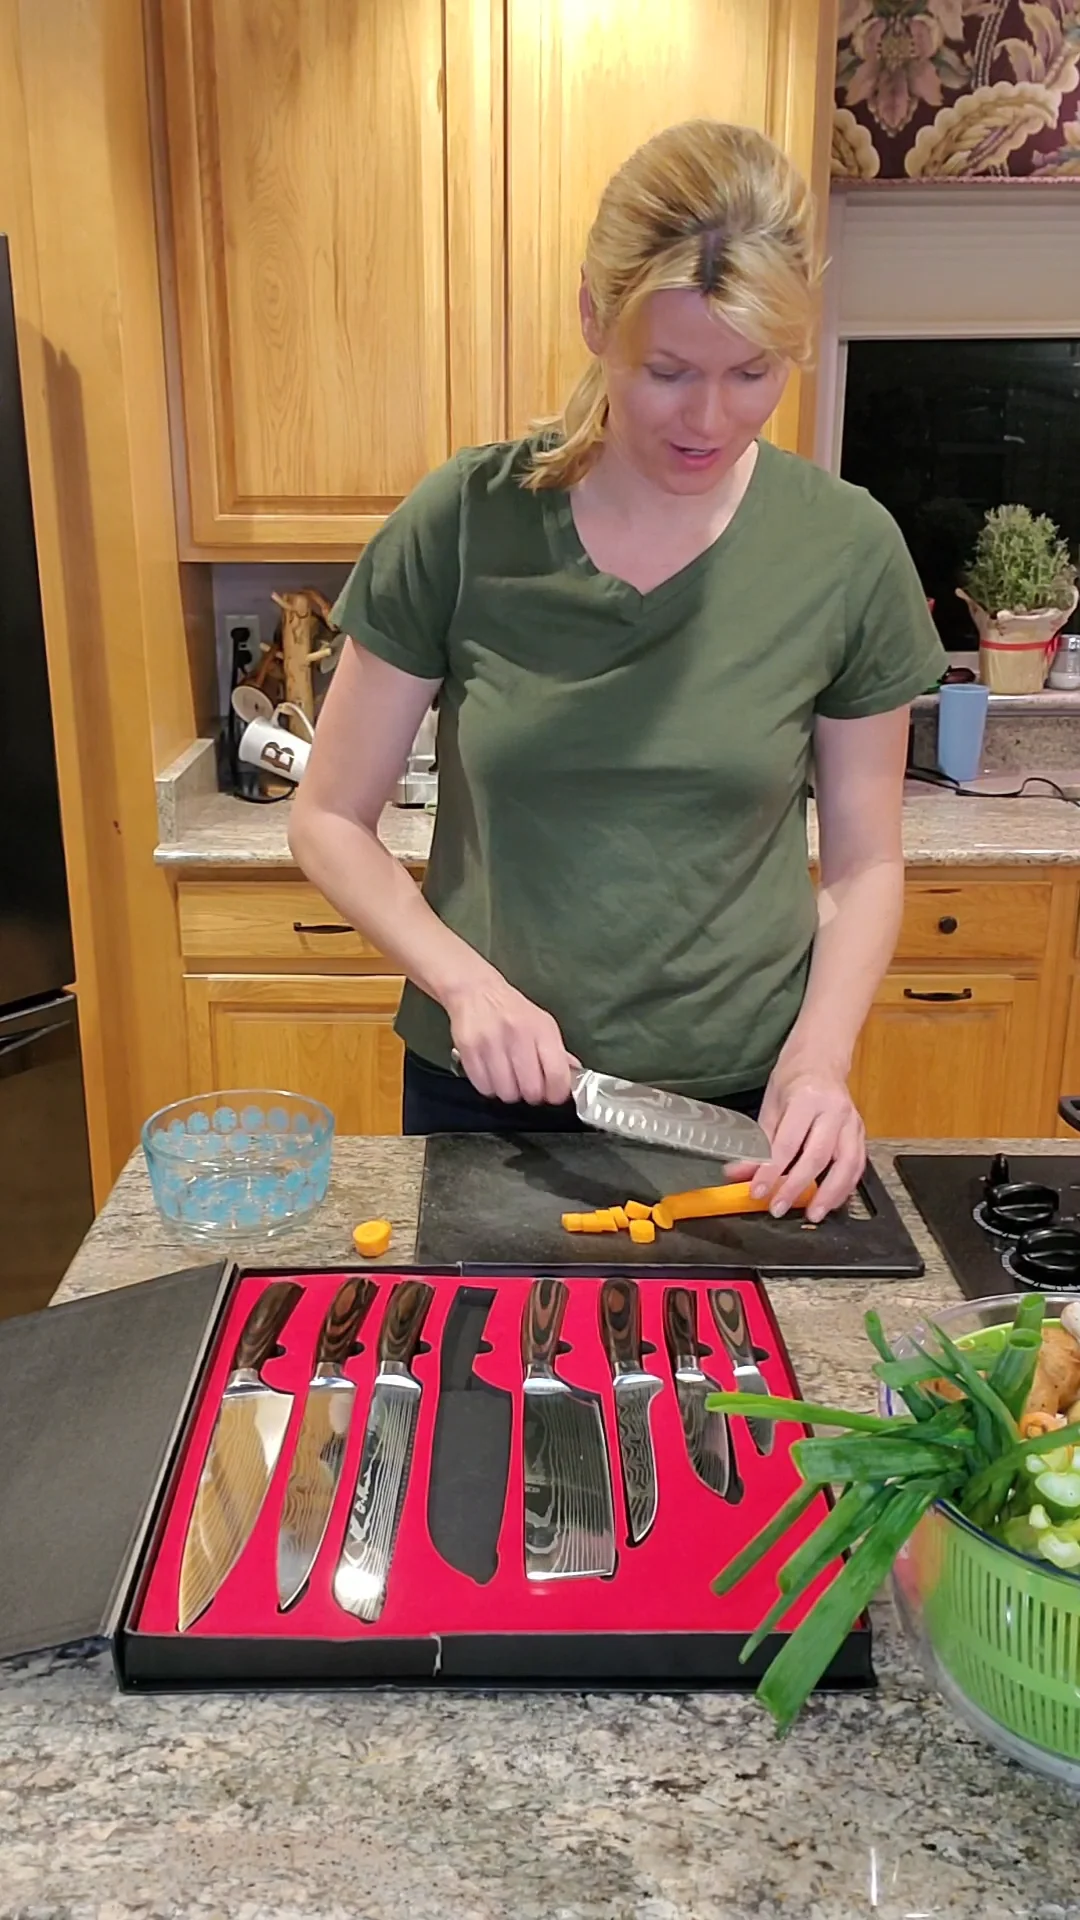 Seido Knives Overview: Product Unboxing on Vimeo